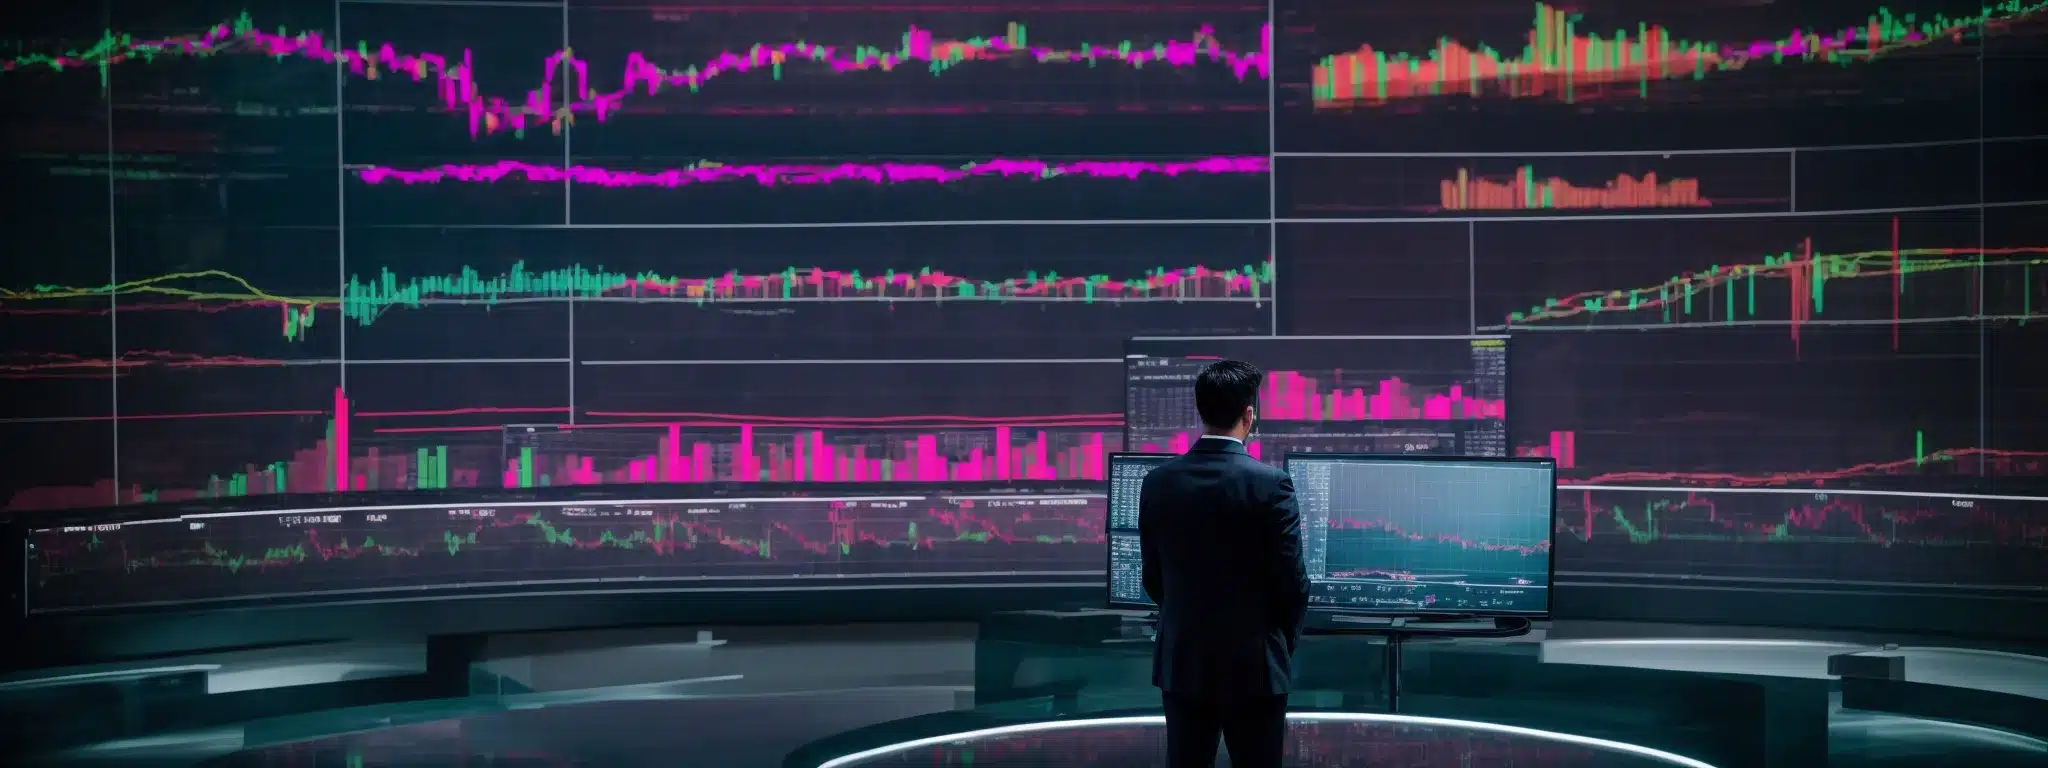 A Strategist Stands Before A Vast Digital Screen Displaying Colorful Charts And Graphs That Track Market Performance.